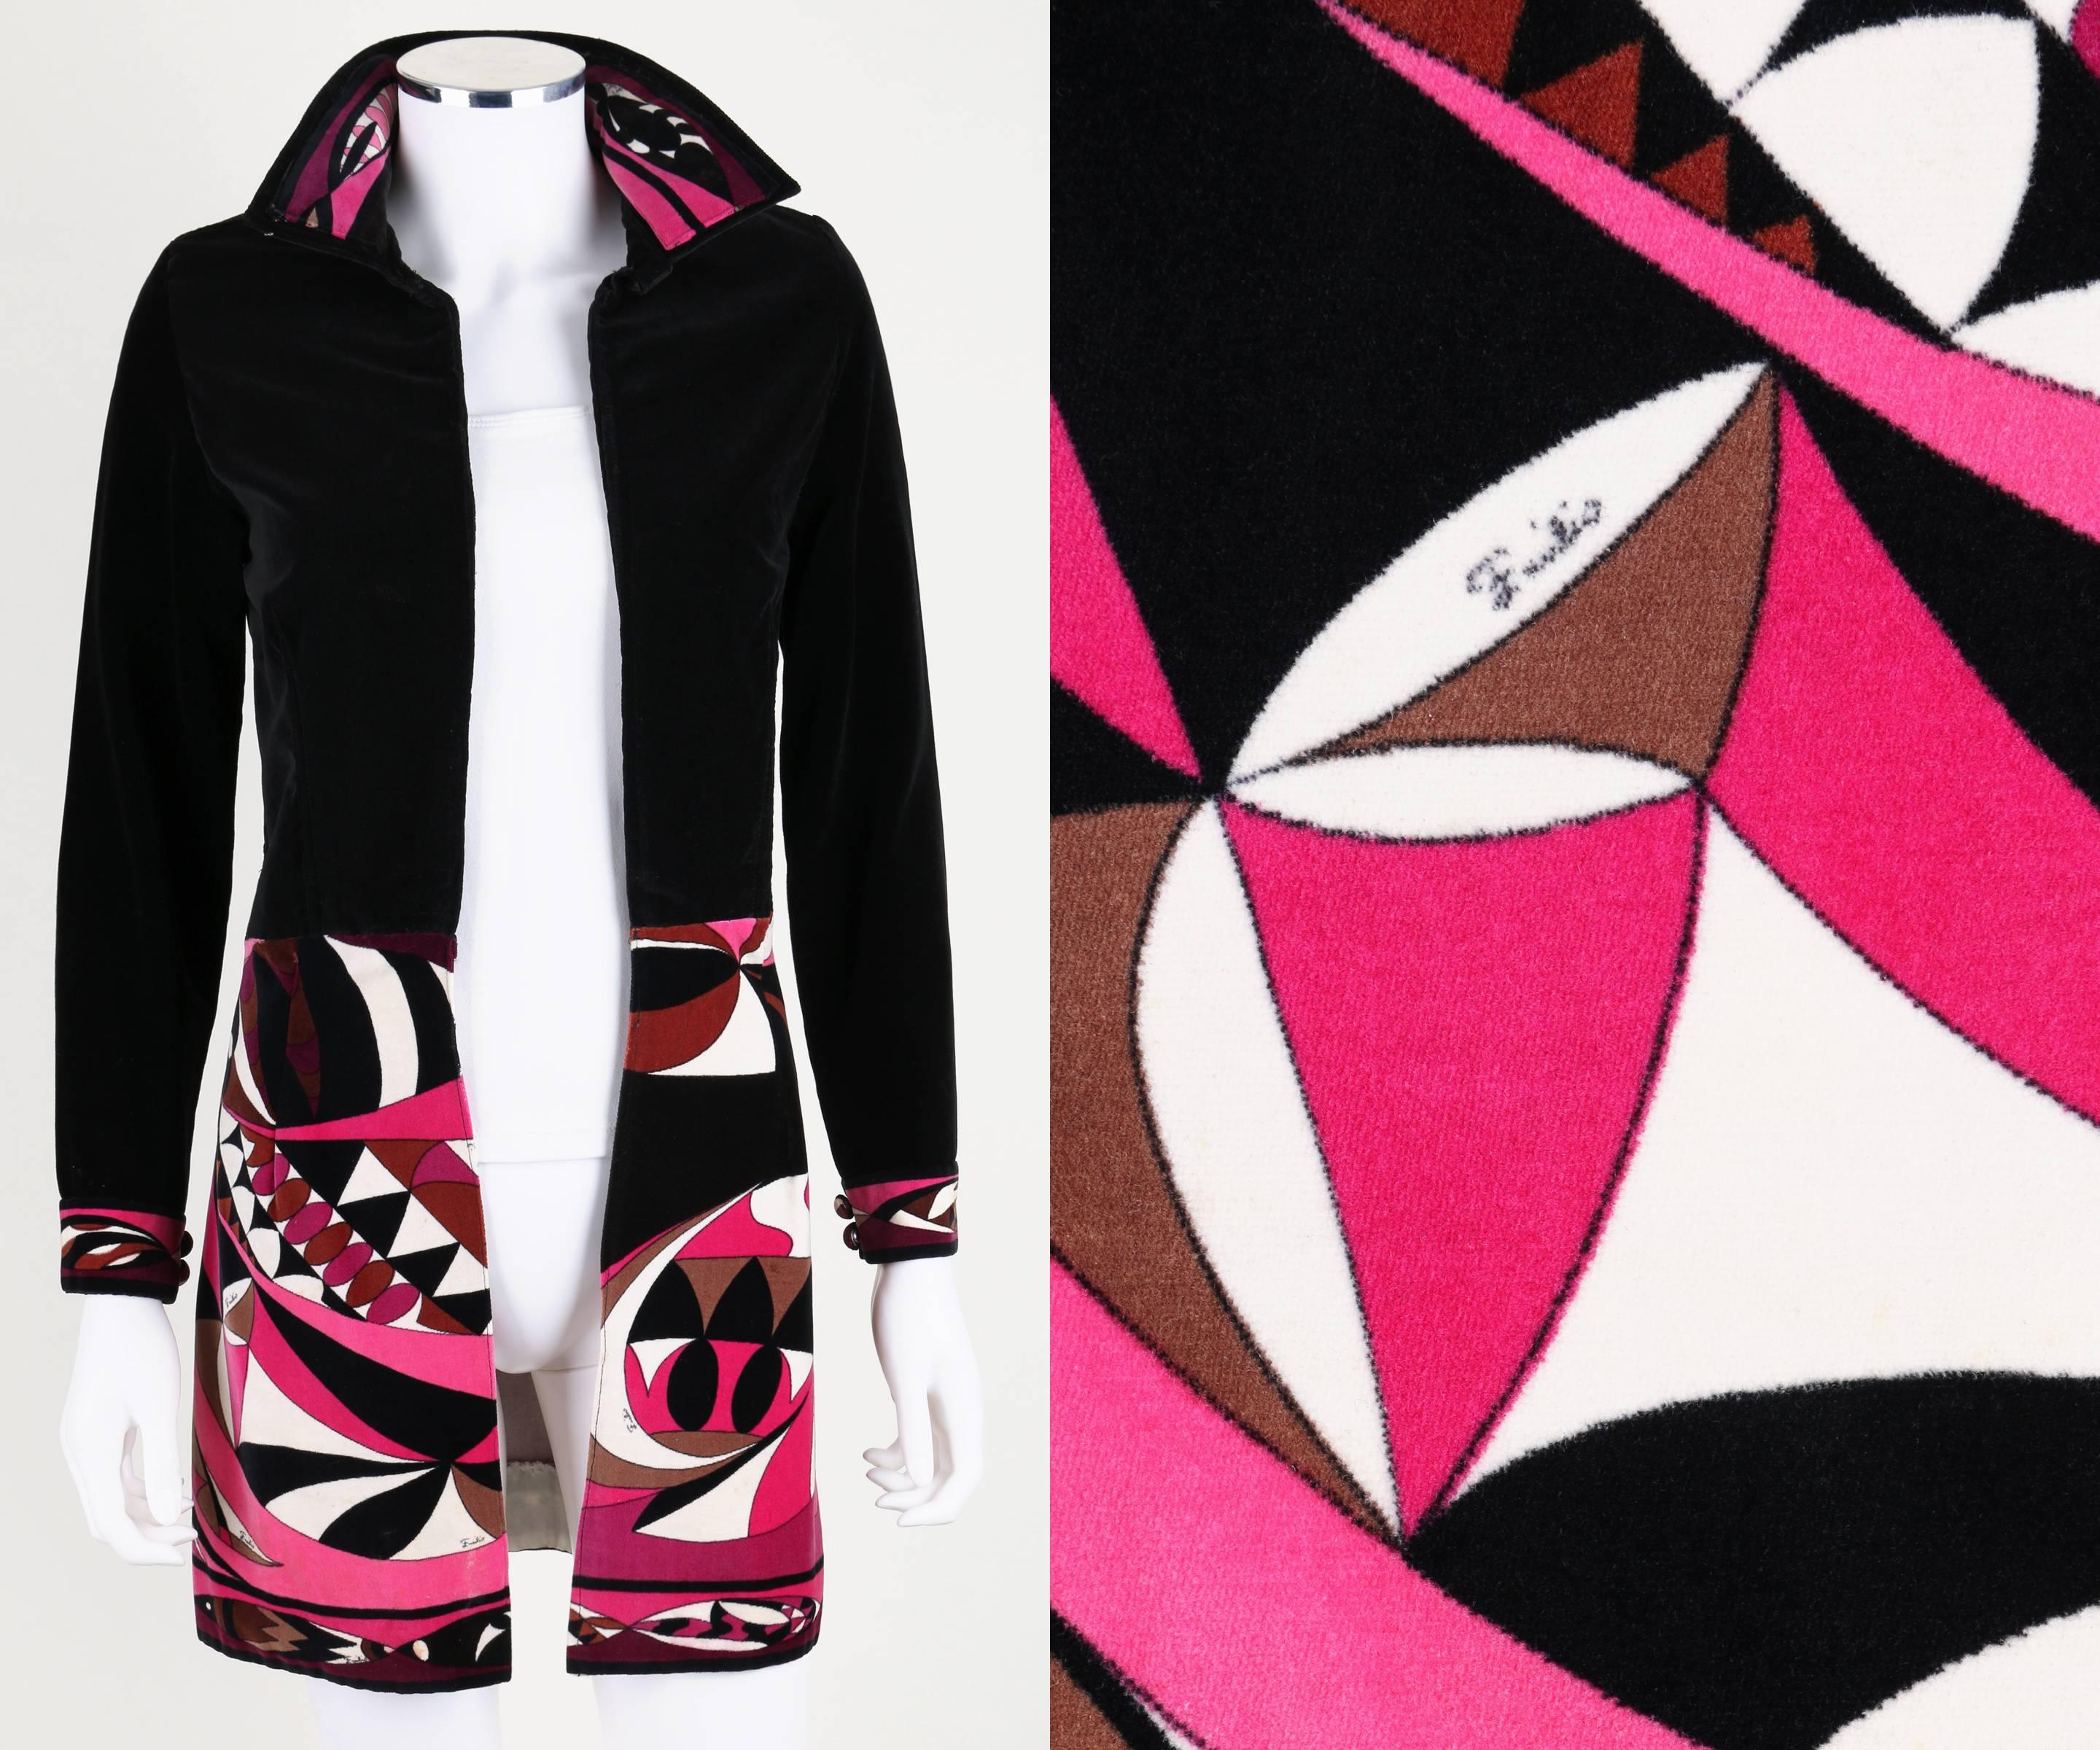 Vintage c.1960's-1970's one of a kind long jacket/blazer made of Emilio Pucci signature print velveteen. Solid black velveteen body with contrasting pink multicolor signature print bottom panel. Long sleeves button at cuffs. Decorative border detail